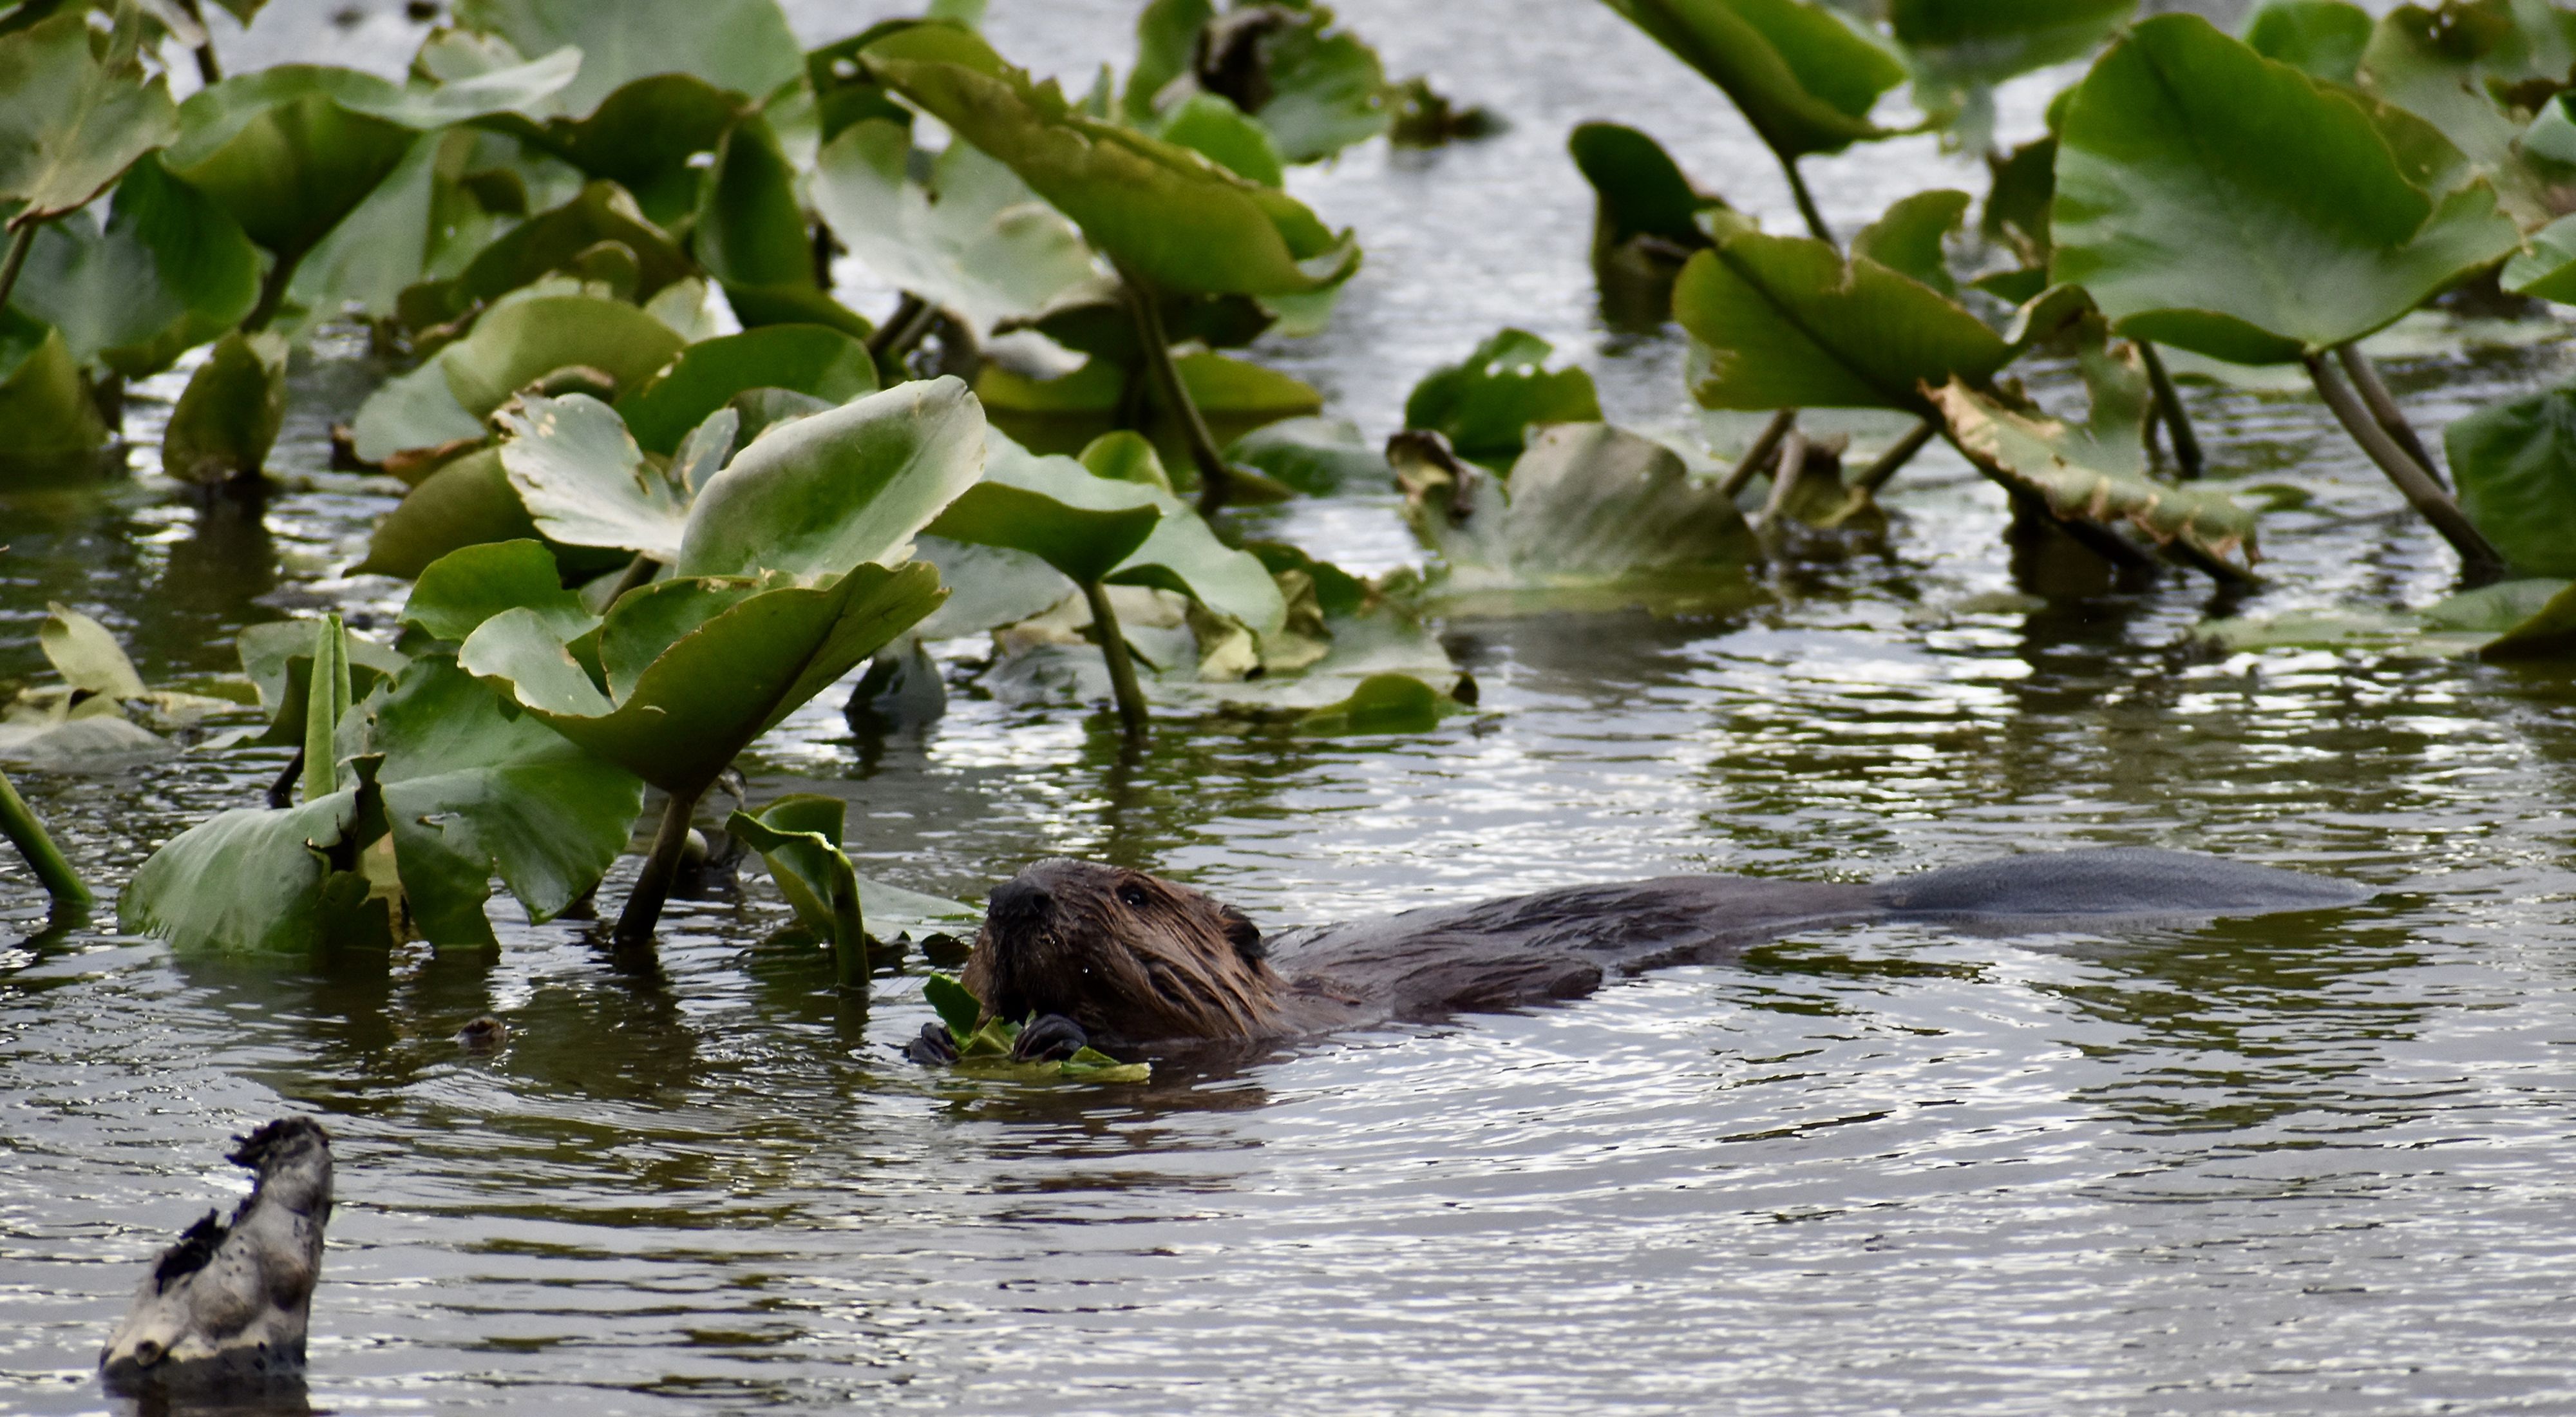 A beaver swims in a lake created by beaver activity. Its head, back and flat tail are visible at the surface of the rippling water. Thick leaves from aquatic plants float behind it.